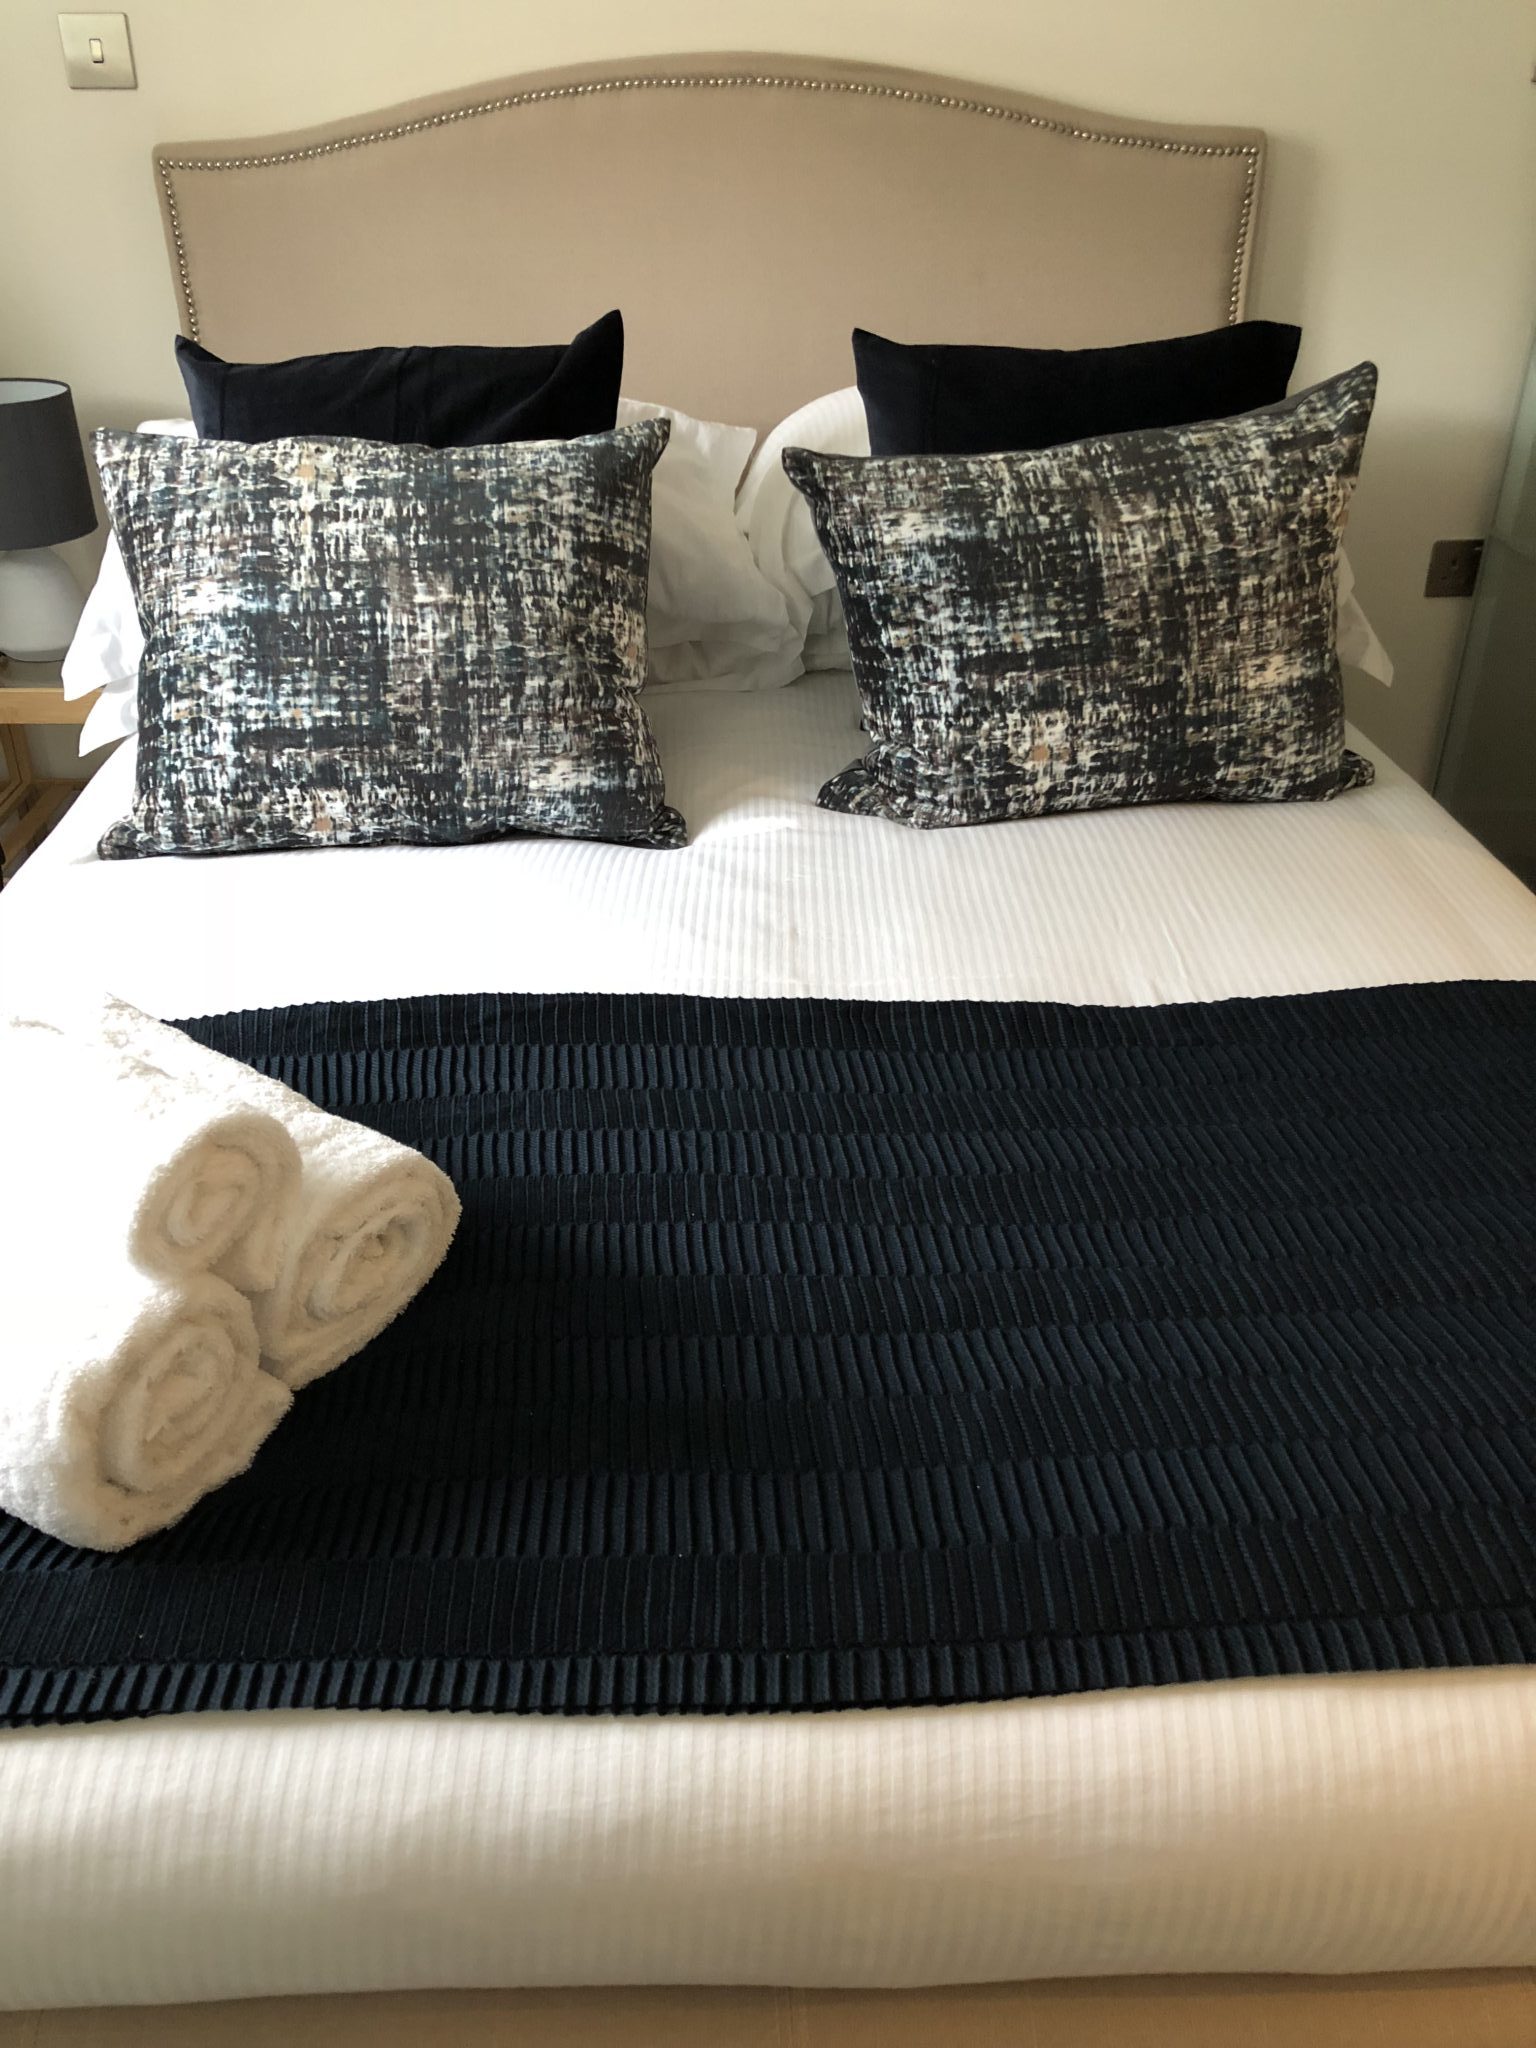 Serviced-Apartments-St-Albans-Hertfordshire-available-now!-Book-Cheap-Short-Let-Apartments-with-Free-Wifi-&-Parking-&-a-Fully-Equipped-Kitchen